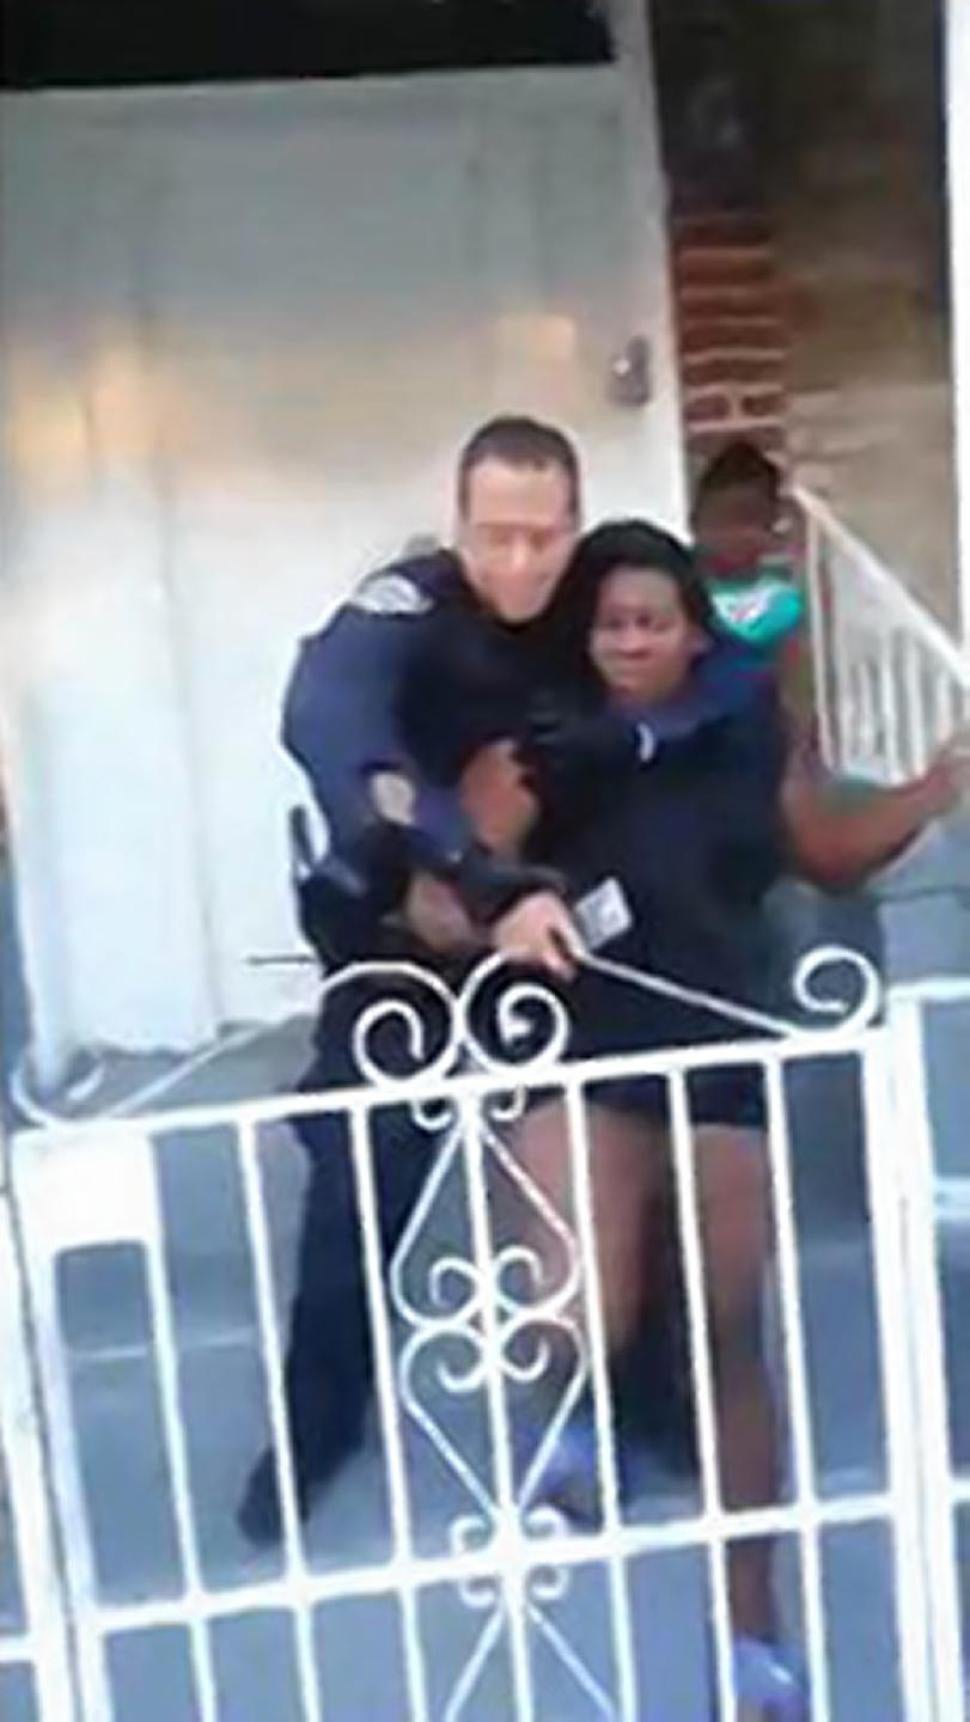 NYPD Cop Allegedly Puts Pregnant Woman in Chokehold